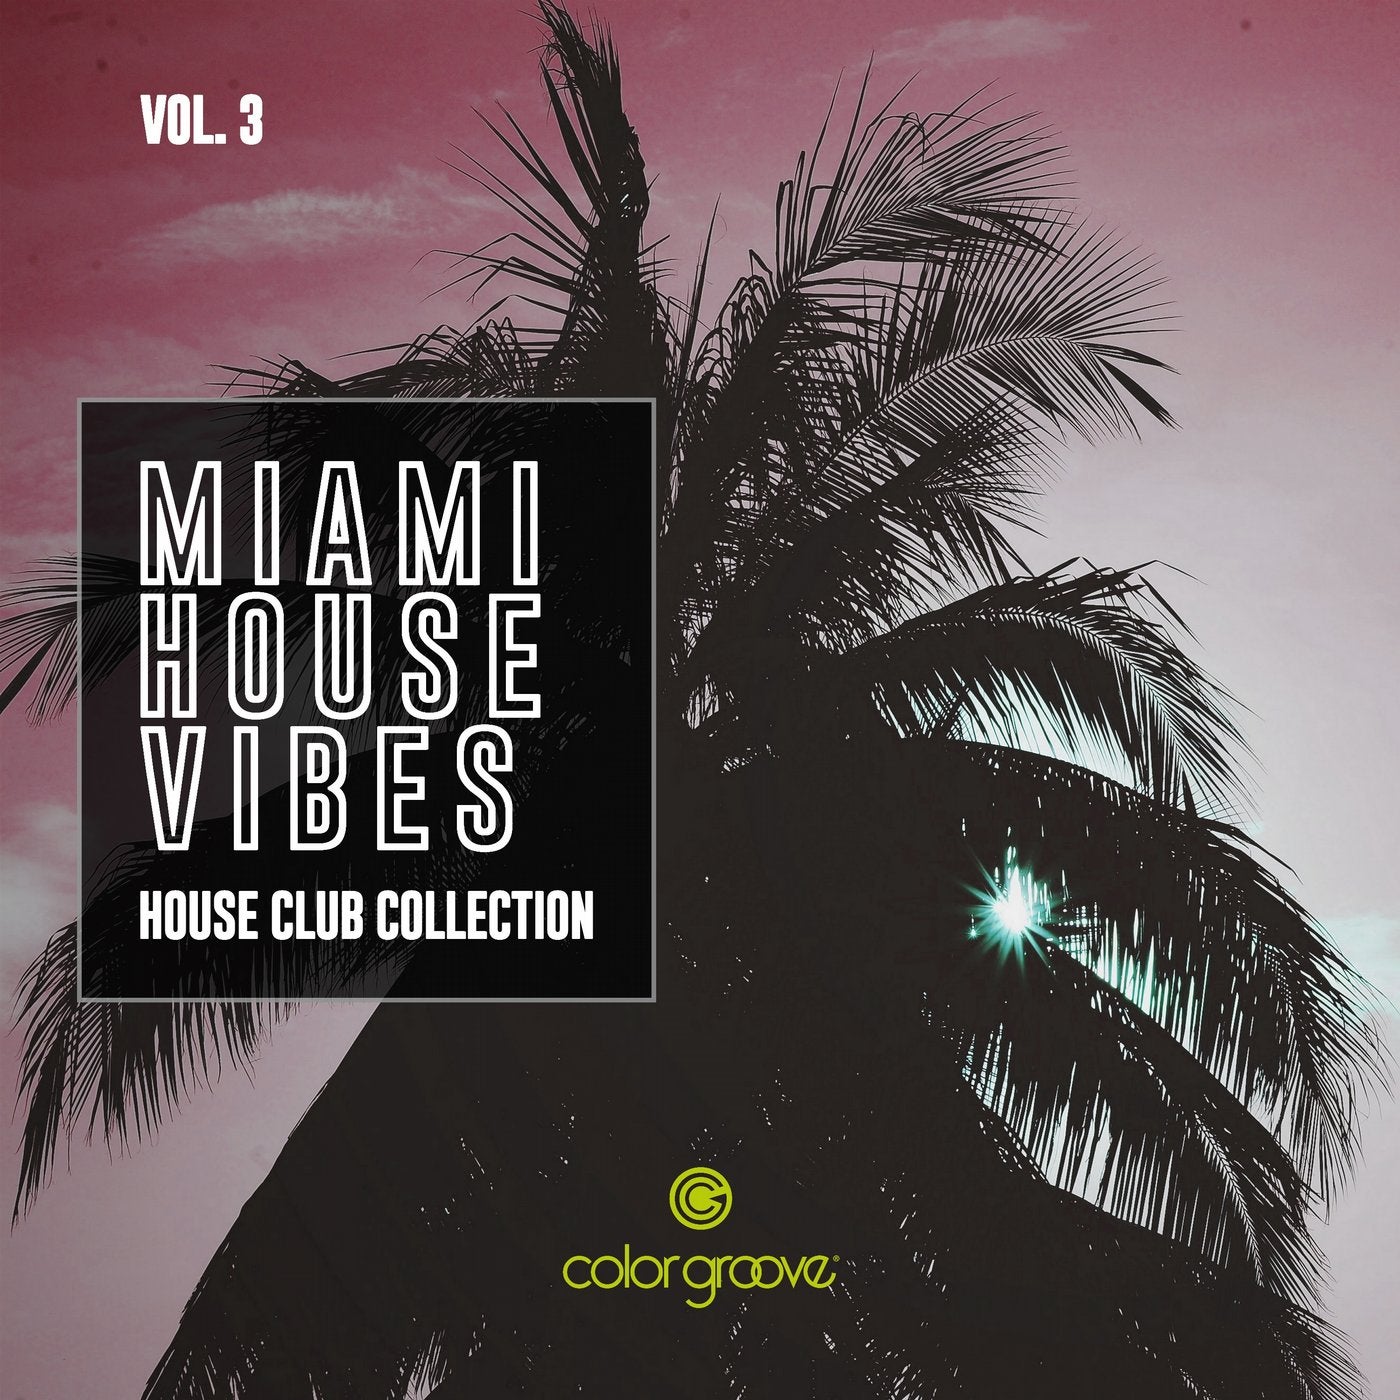 Miami House Vibes, Vol. 3 (House Club Collection)